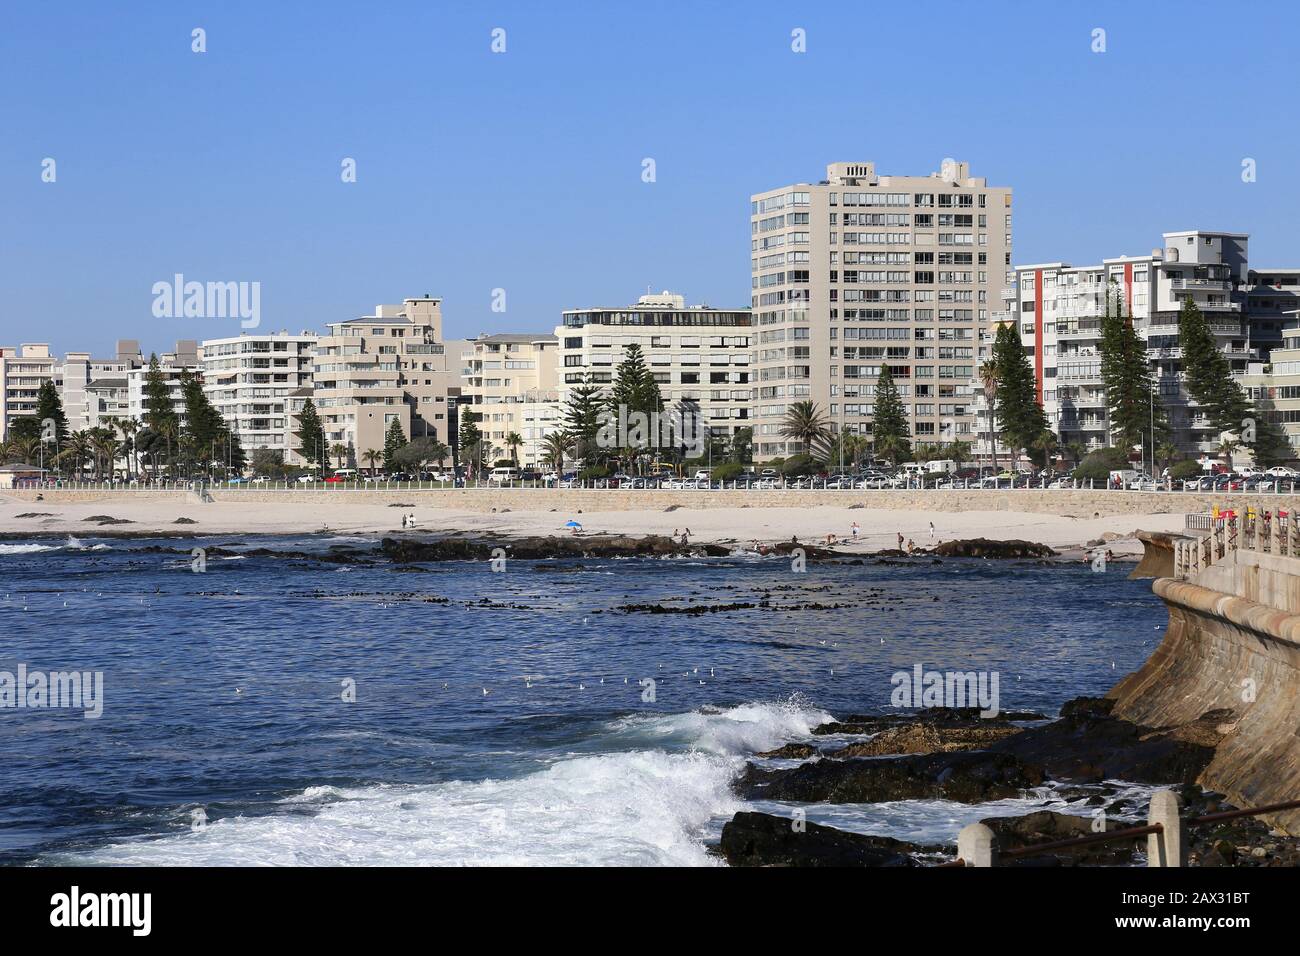 Seafront apartments, Beach Road, Sea Point, Cape Town, Table Bay, Western Cape Province, South Africa, Africa Stock Photo